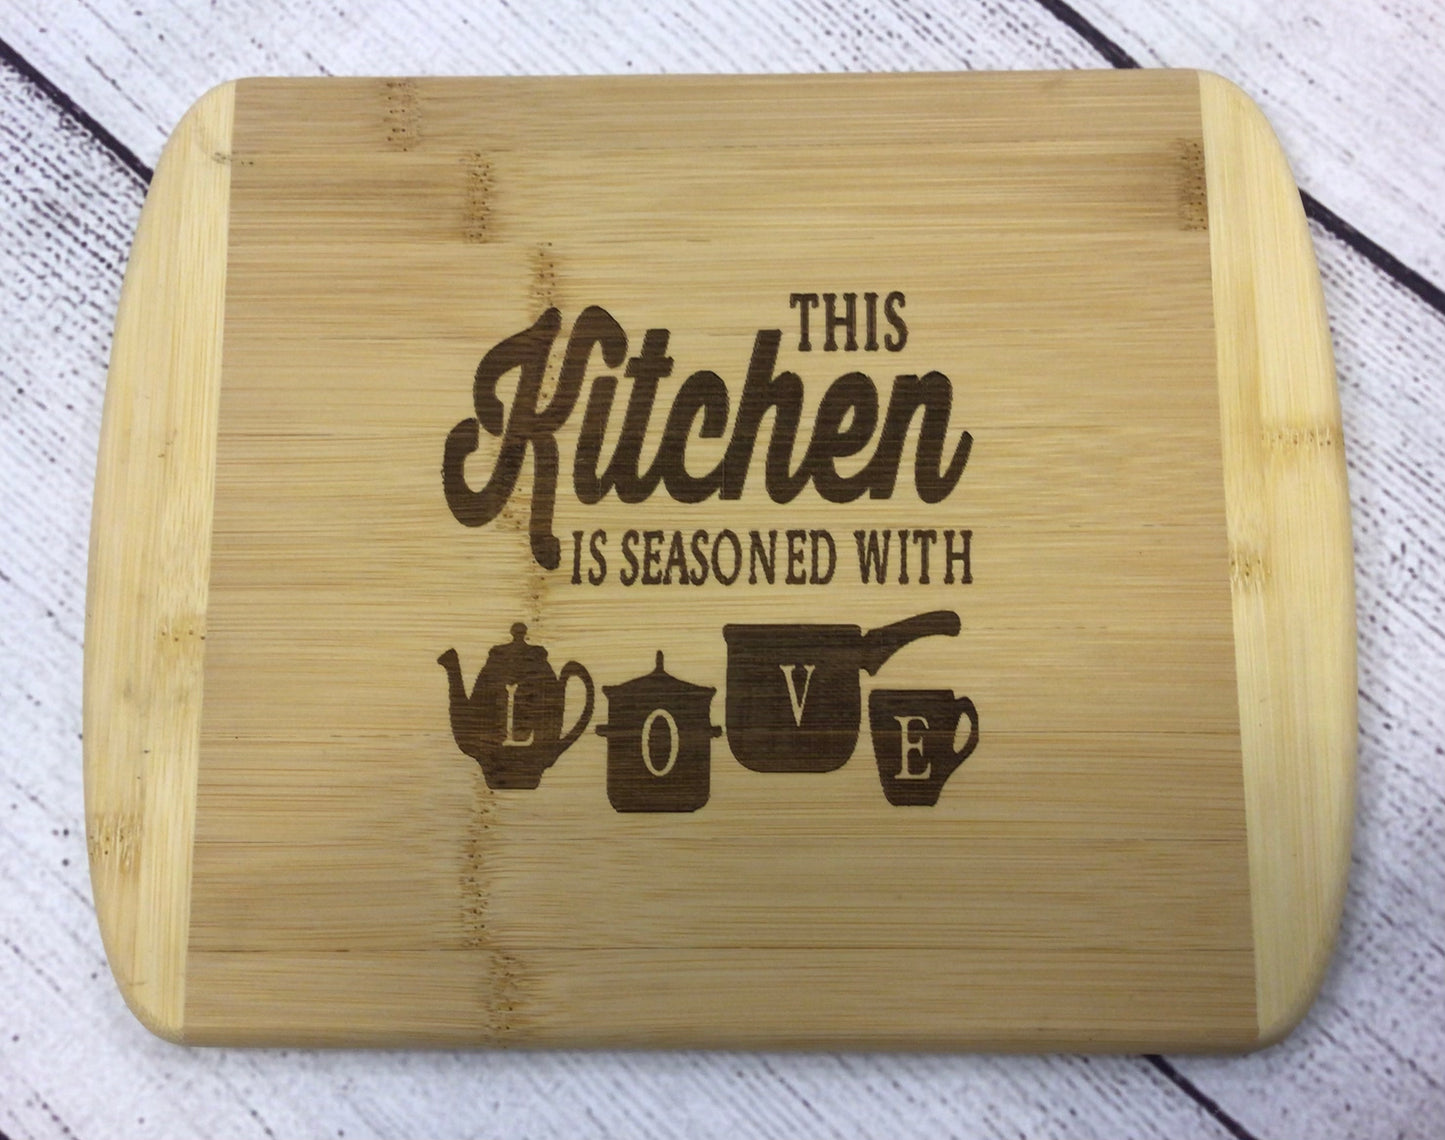 This kitchen……..cutting board